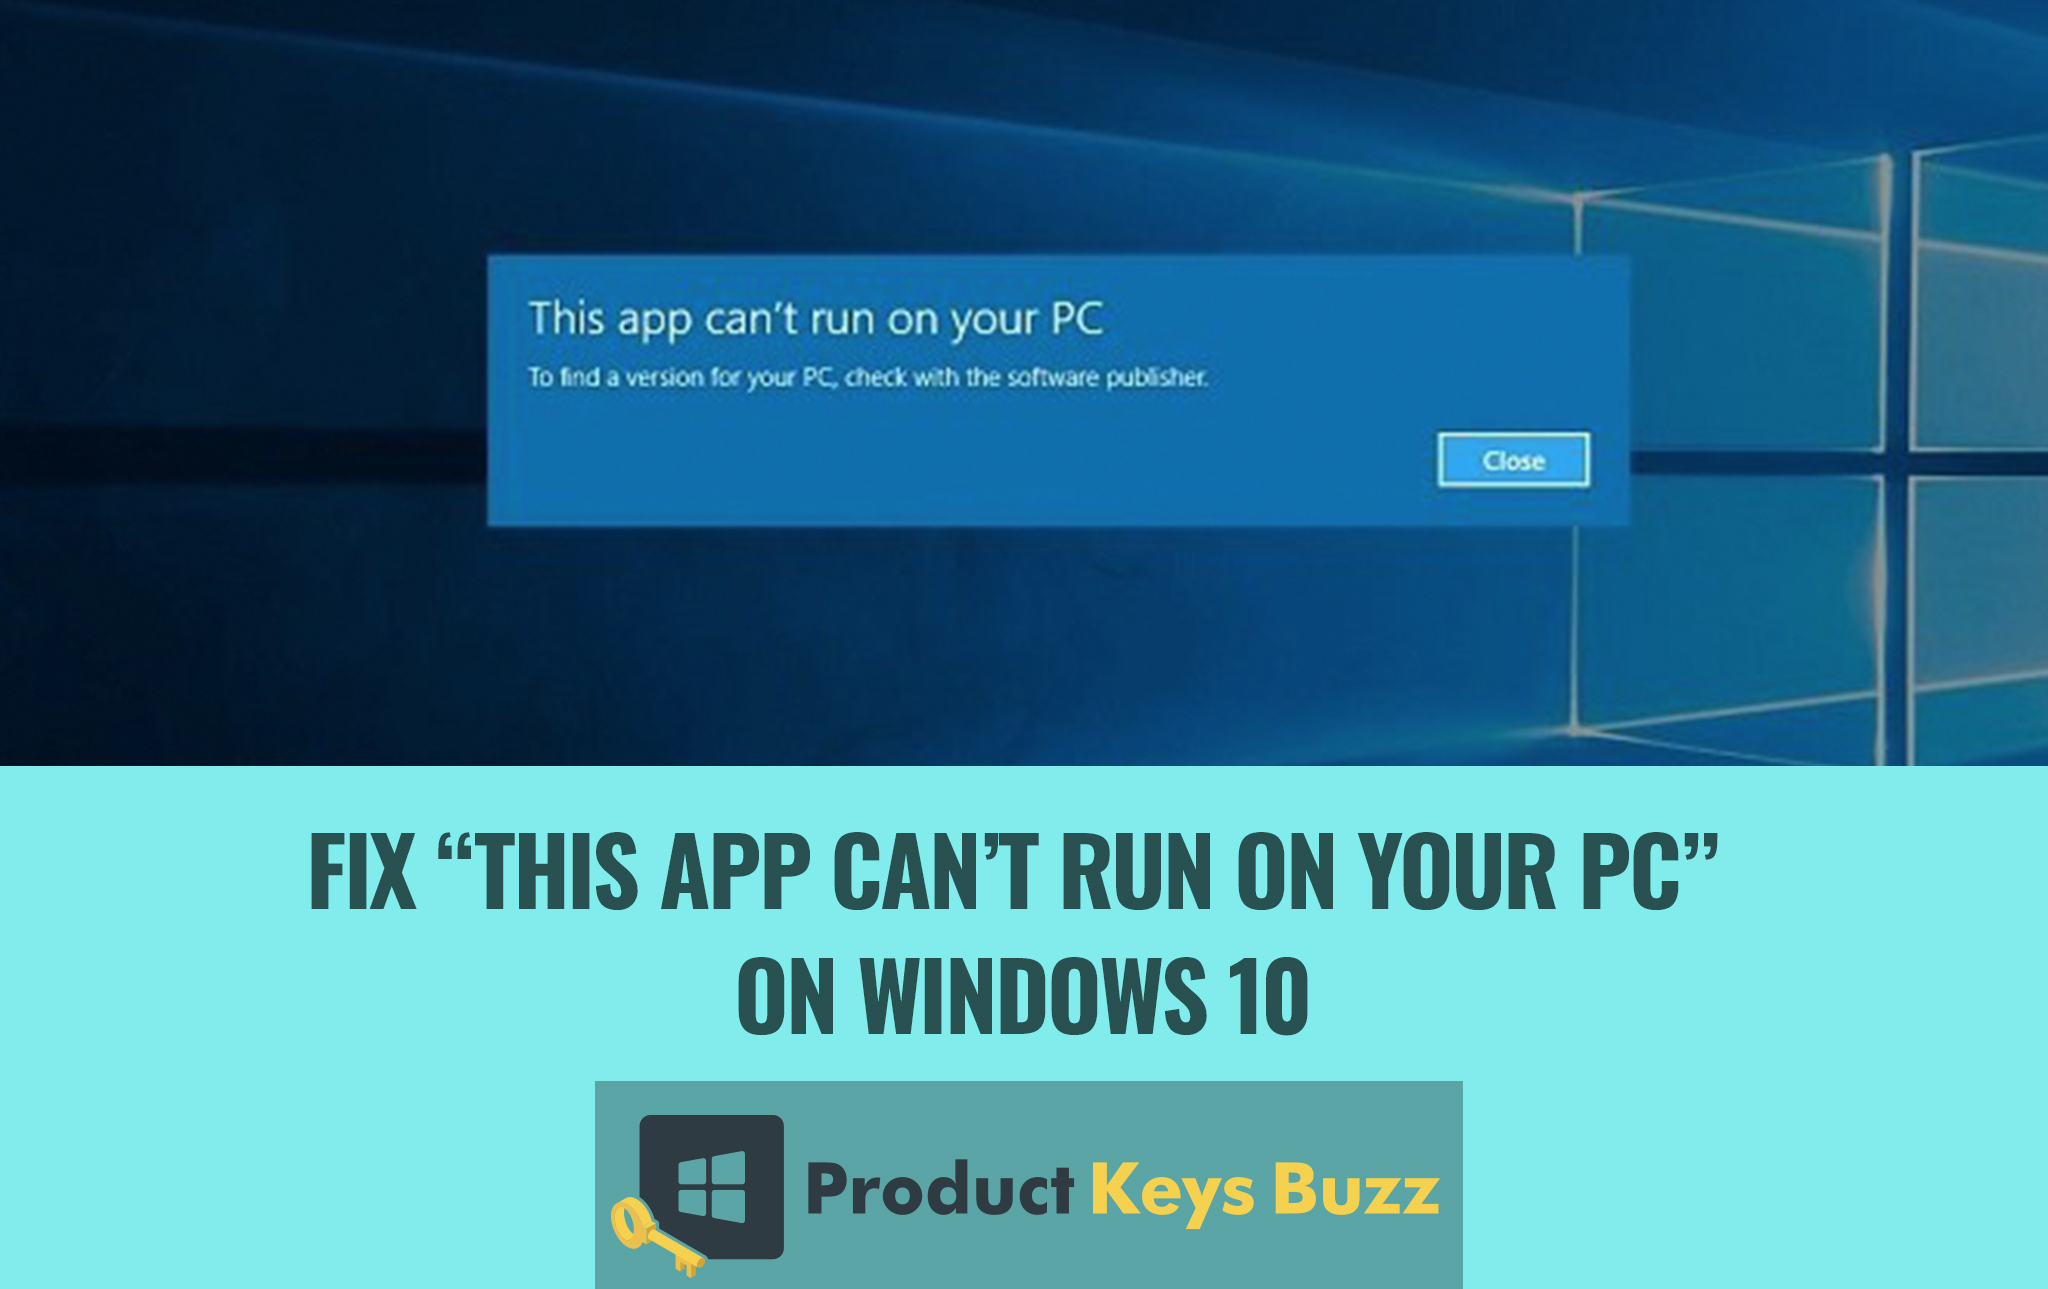 Run Windows 10. Run Windows. This app can't Run on your PC. How to fix this